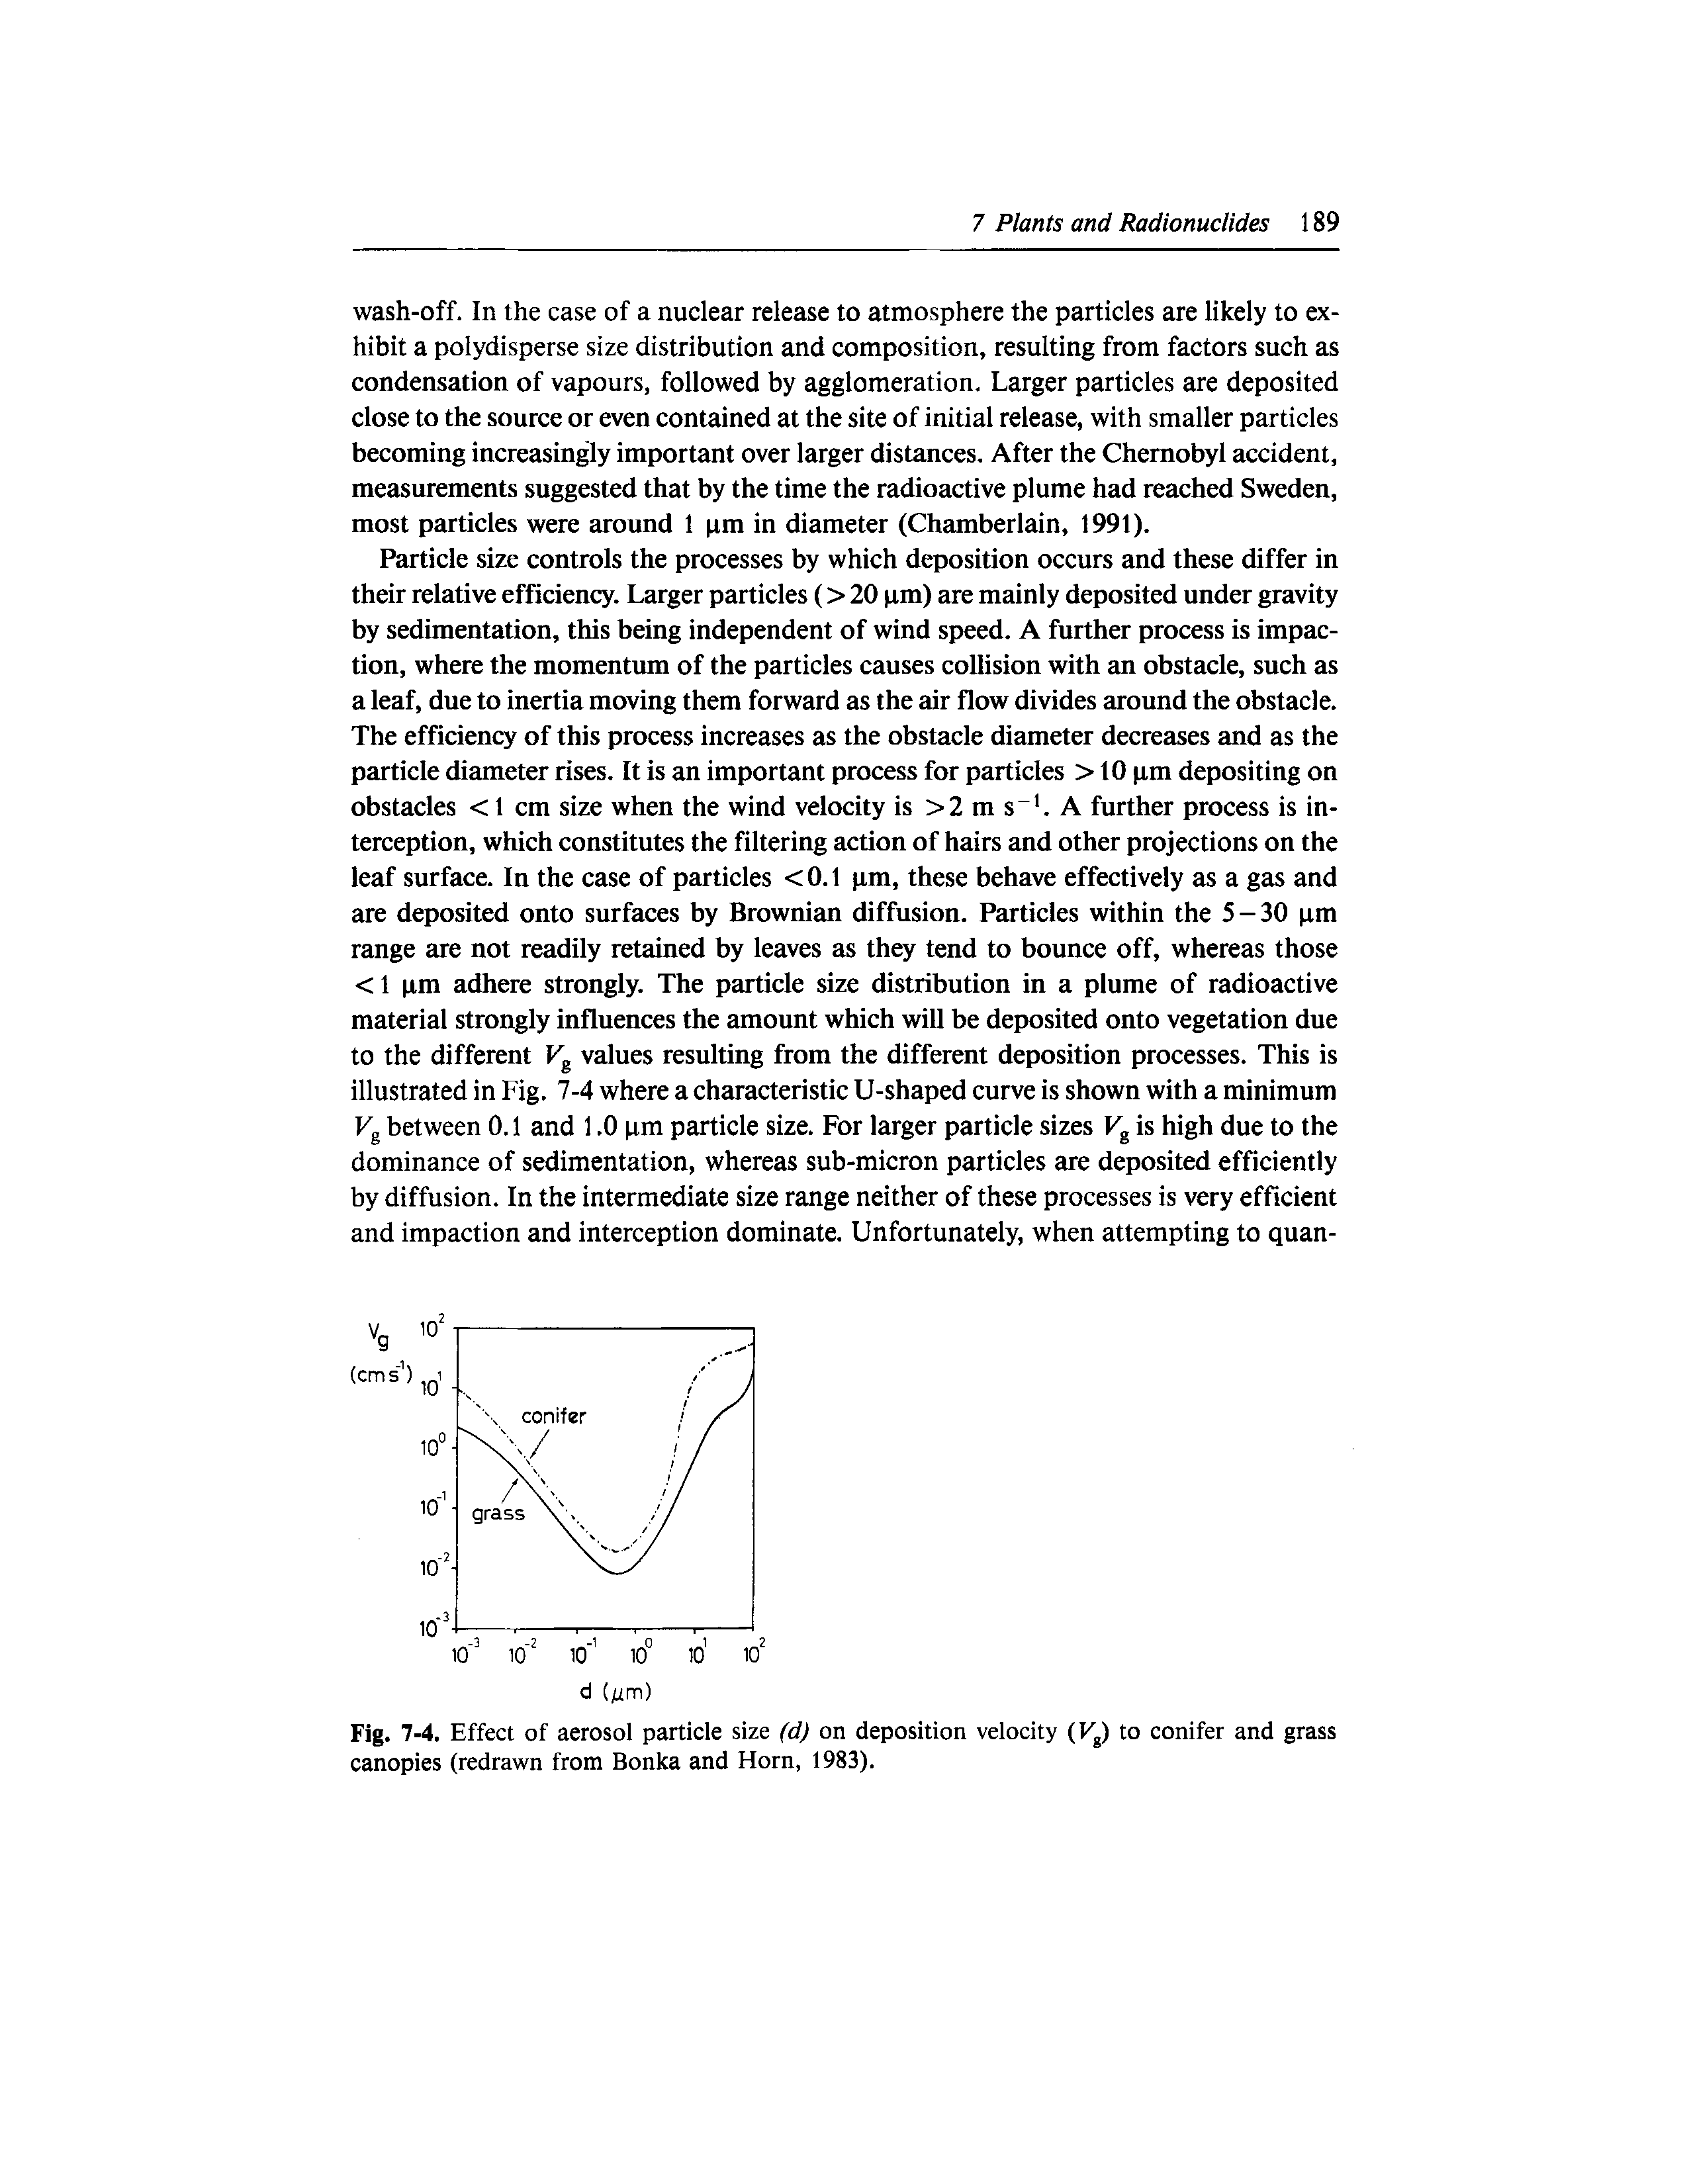 Fig. 7-4. Effect of aerosol particle size (d) on deposition velocity (Kg) to conifer and grass canopies (redrawn from Bonka and Horn, 1983).